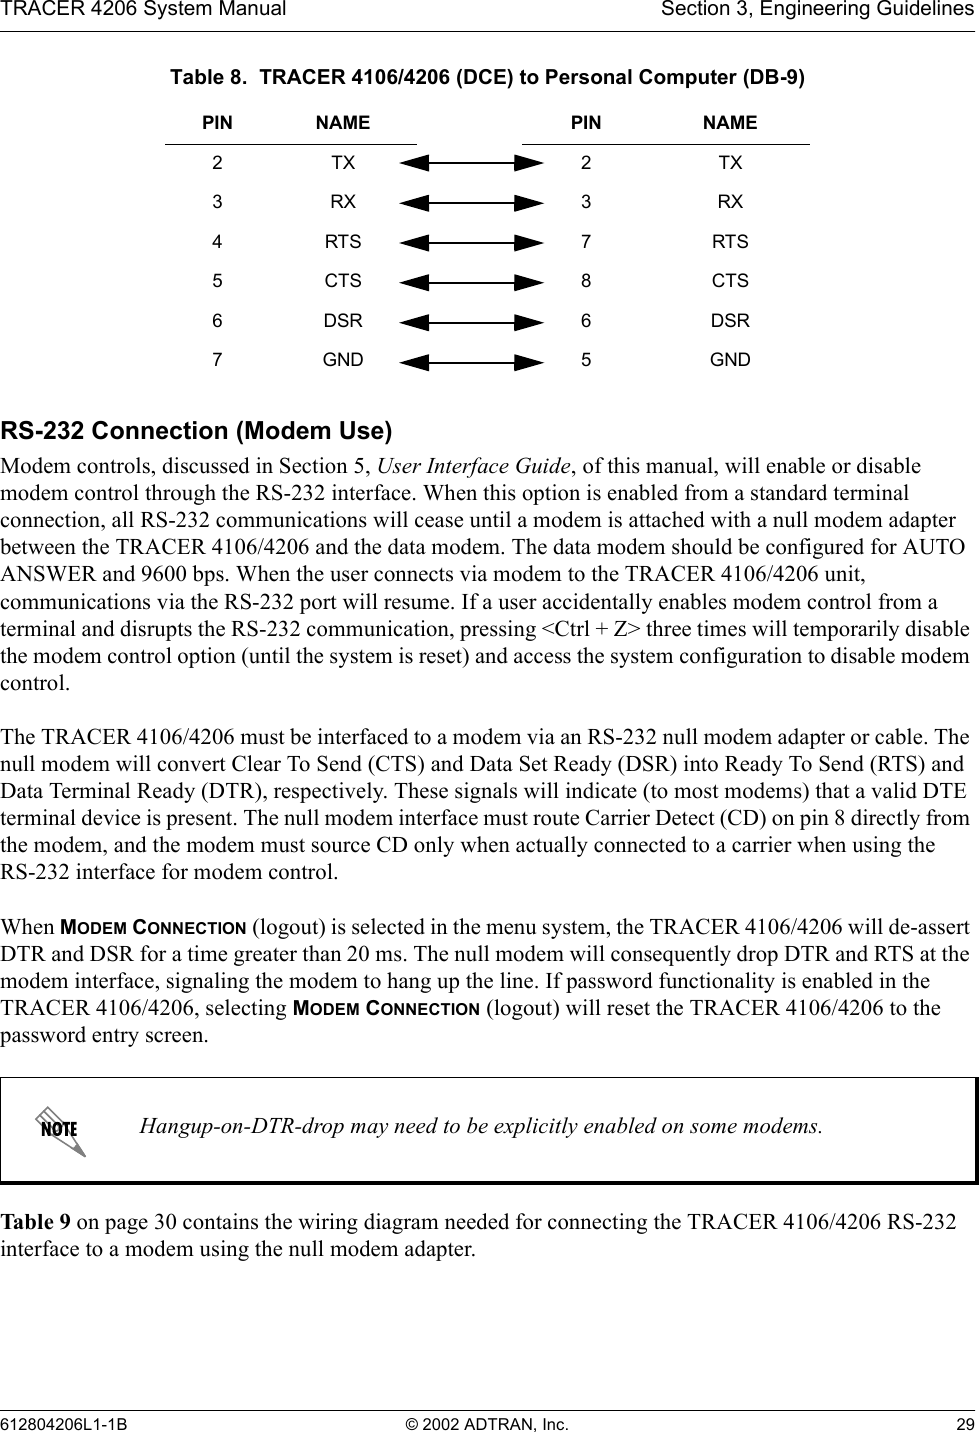 TRACER 4206 System Manual Section 3, Engineering Guidelines612804206L1-1B © 2002 ADTRAN, Inc. 29RS-232 Connection (Modem Use)Modem controls, discussed in Section 5, User Interface Guide, of this manual, will enable or disable modem control through the RS-232 interface. When this option is enabled from a standard terminal connection, all RS-232 communications will cease until a modem is attached with a null modem adapter between the TRACER 4106/4206 and the data modem. The data modem should be configured for AUTO ANSWER and 9600 bps. When the user connects via modem to the TRACER 4106/4206 unit, communications via the RS-232 port will resume. If a user accidentally enables modem control from a terminal and disrupts the RS-232 communication, pressing &lt;Ctrl + Z&gt; three times will temporarily disable the modem control option (until the system is reset) and access the system configuration to disable modem control.The TRACER 4106/4206 must be interfaced to a modem via an RS-232 null modem adapter or cable. The null modem will convert Clear To Send (CTS) and Data Set Ready (DSR) into Ready To Send (RTS) and Data Terminal Ready (DTR), respectively. These signals will indicate (to most modems) that a valid DTE terminal device is present. The null modem interface must route Carrier Detect (CD) on pin 8 directly from the modem, and the modem must source CD only when actually connected to a carrier when using the RS-232 interface for modem control. When MODEM CONNECTION (logout) is selected in the menu system, the TRACER 4106/4206 will de-assert DTR and DSR for a time greater than 20 ms. The null modem will consequently drop DTR and RTS at the modem interface, signaling the modem to hang up the line. If password functionality is enabled in the TRACER 4106/4206, selecting MODEM CONNECTION (logout) will reset the TRACER 4106/4206 to the password entry screen.Tab le 9 on page 30 contains the wiring diagram needed for connecting the TRACER 4106/4206 RS-232 interface to a modem using the null modem adapter.Table 8.  TRACER 4106/4206 (DCE) to Personal Computer (DB-9)PIN NAME PIN NAME2TX 2TX3RX 3RX4RTS 7RTS5CTS 8CTS6DSR 6DSR7GND 5GNDHangup-on-DTR-drop may need to be explicitly enabled on some modems.